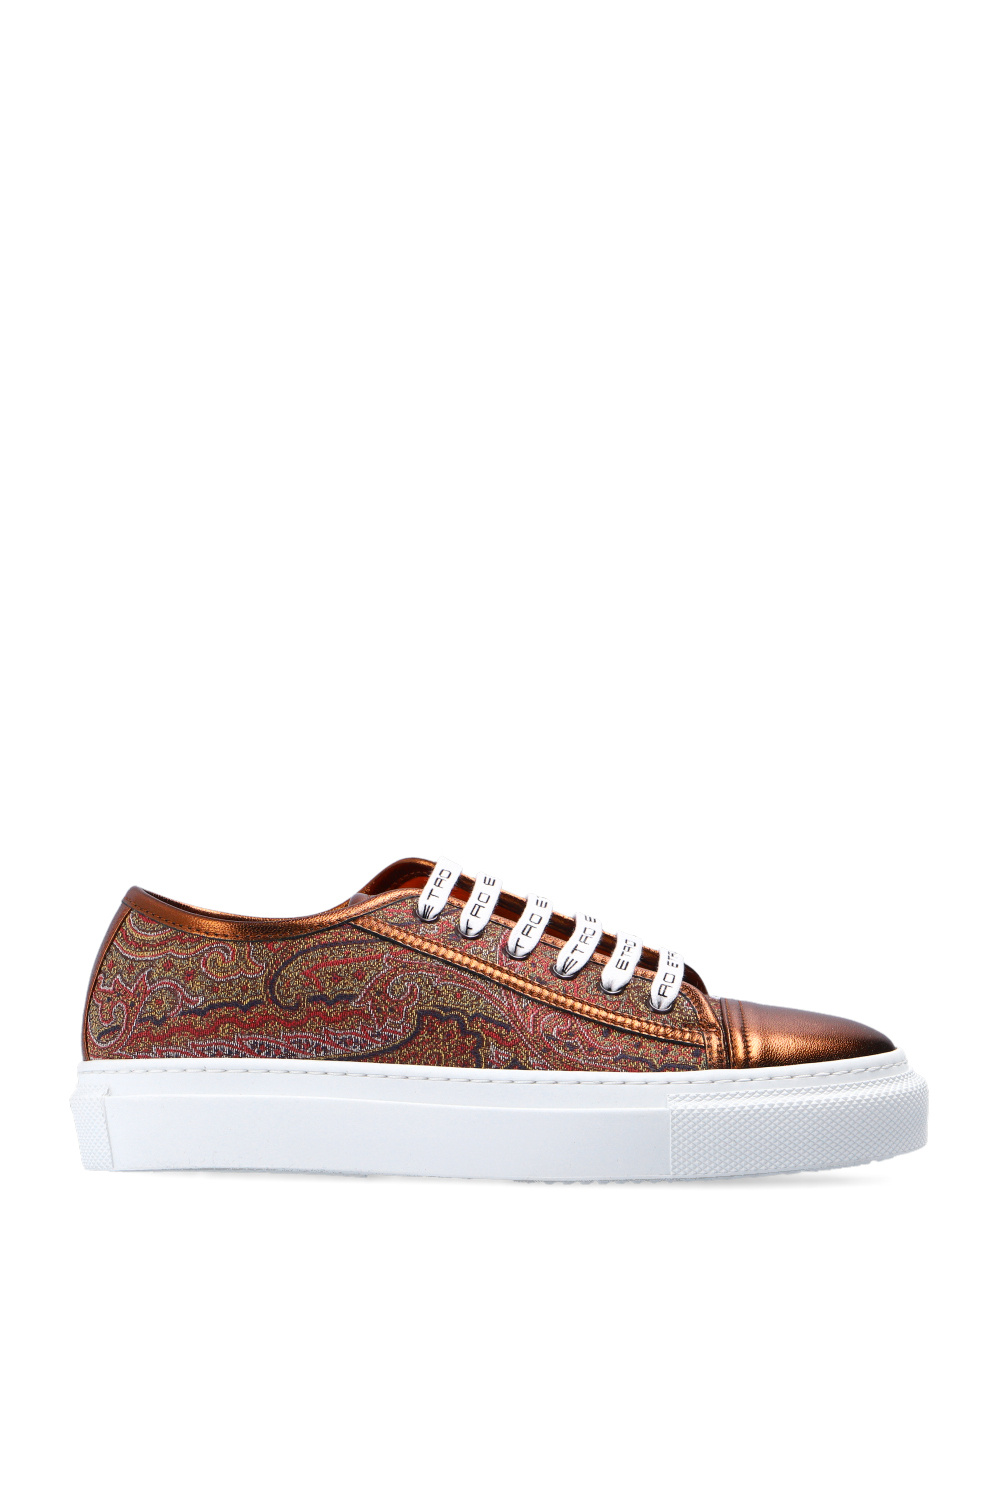 IetpShops | Etro Lace - up sneakers Women's Shoes - improve running economy and develop anaerobic fitness